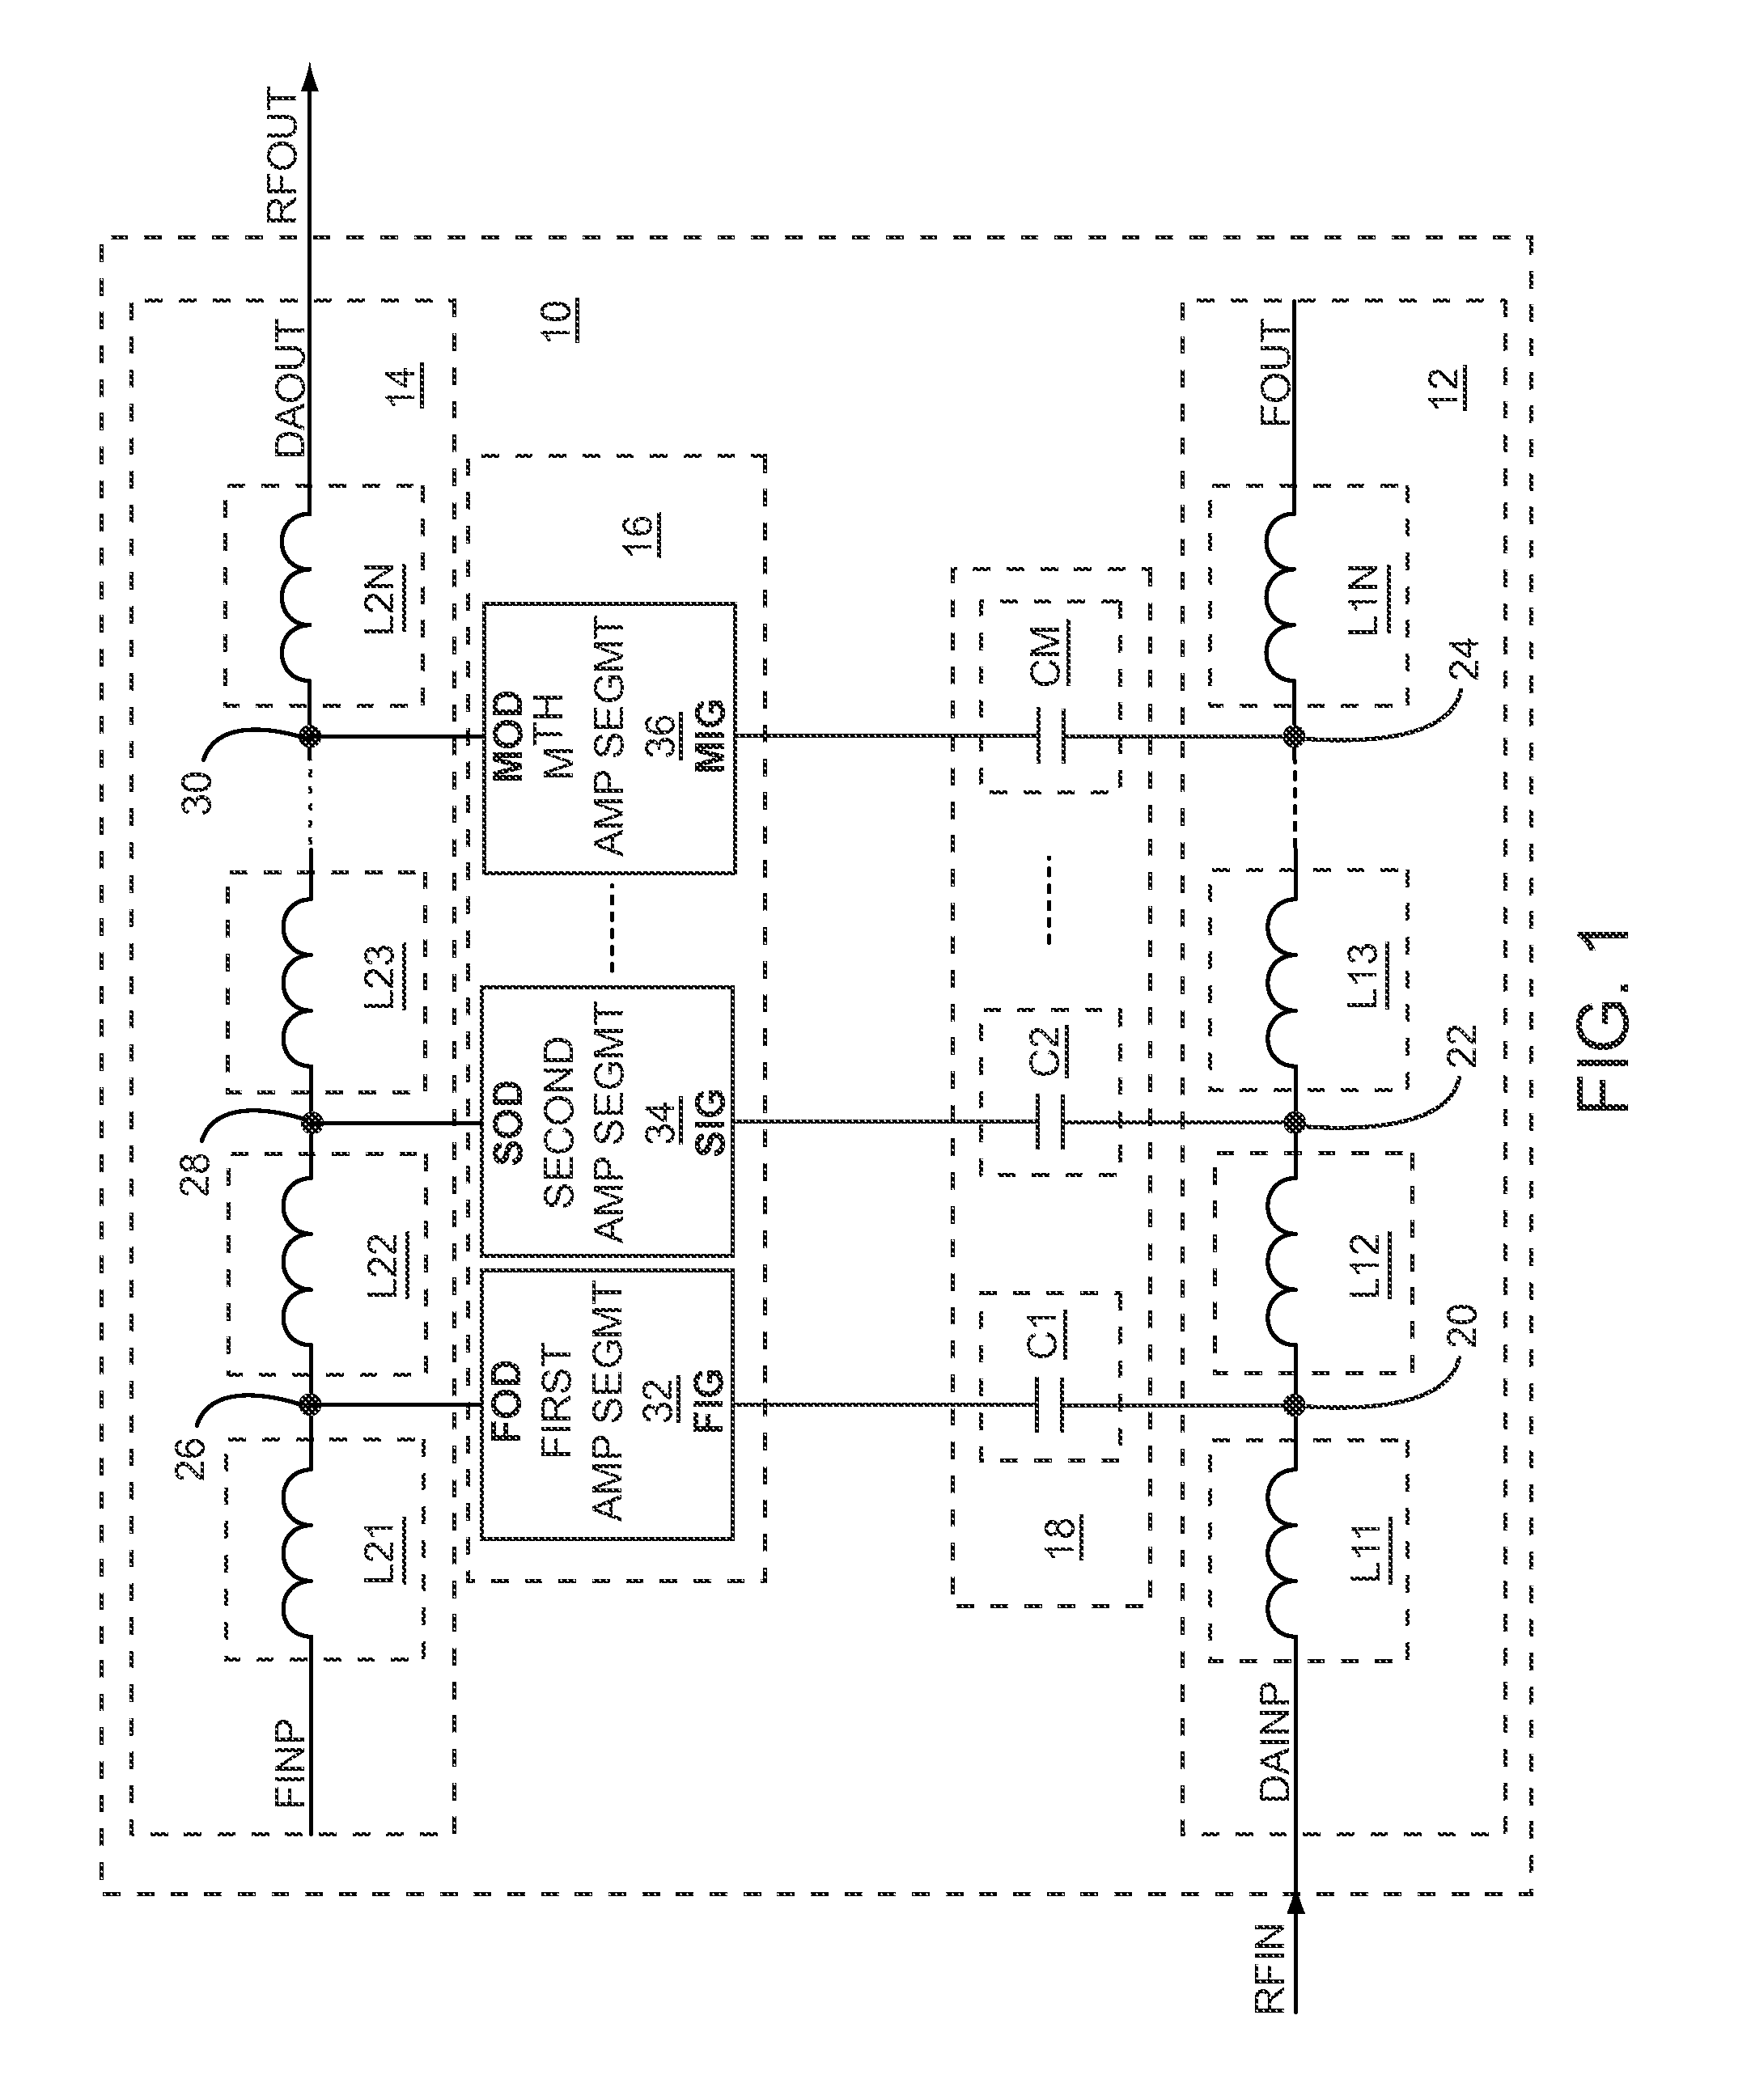 Capacitively-coupled non-uniformly distributed amplifier